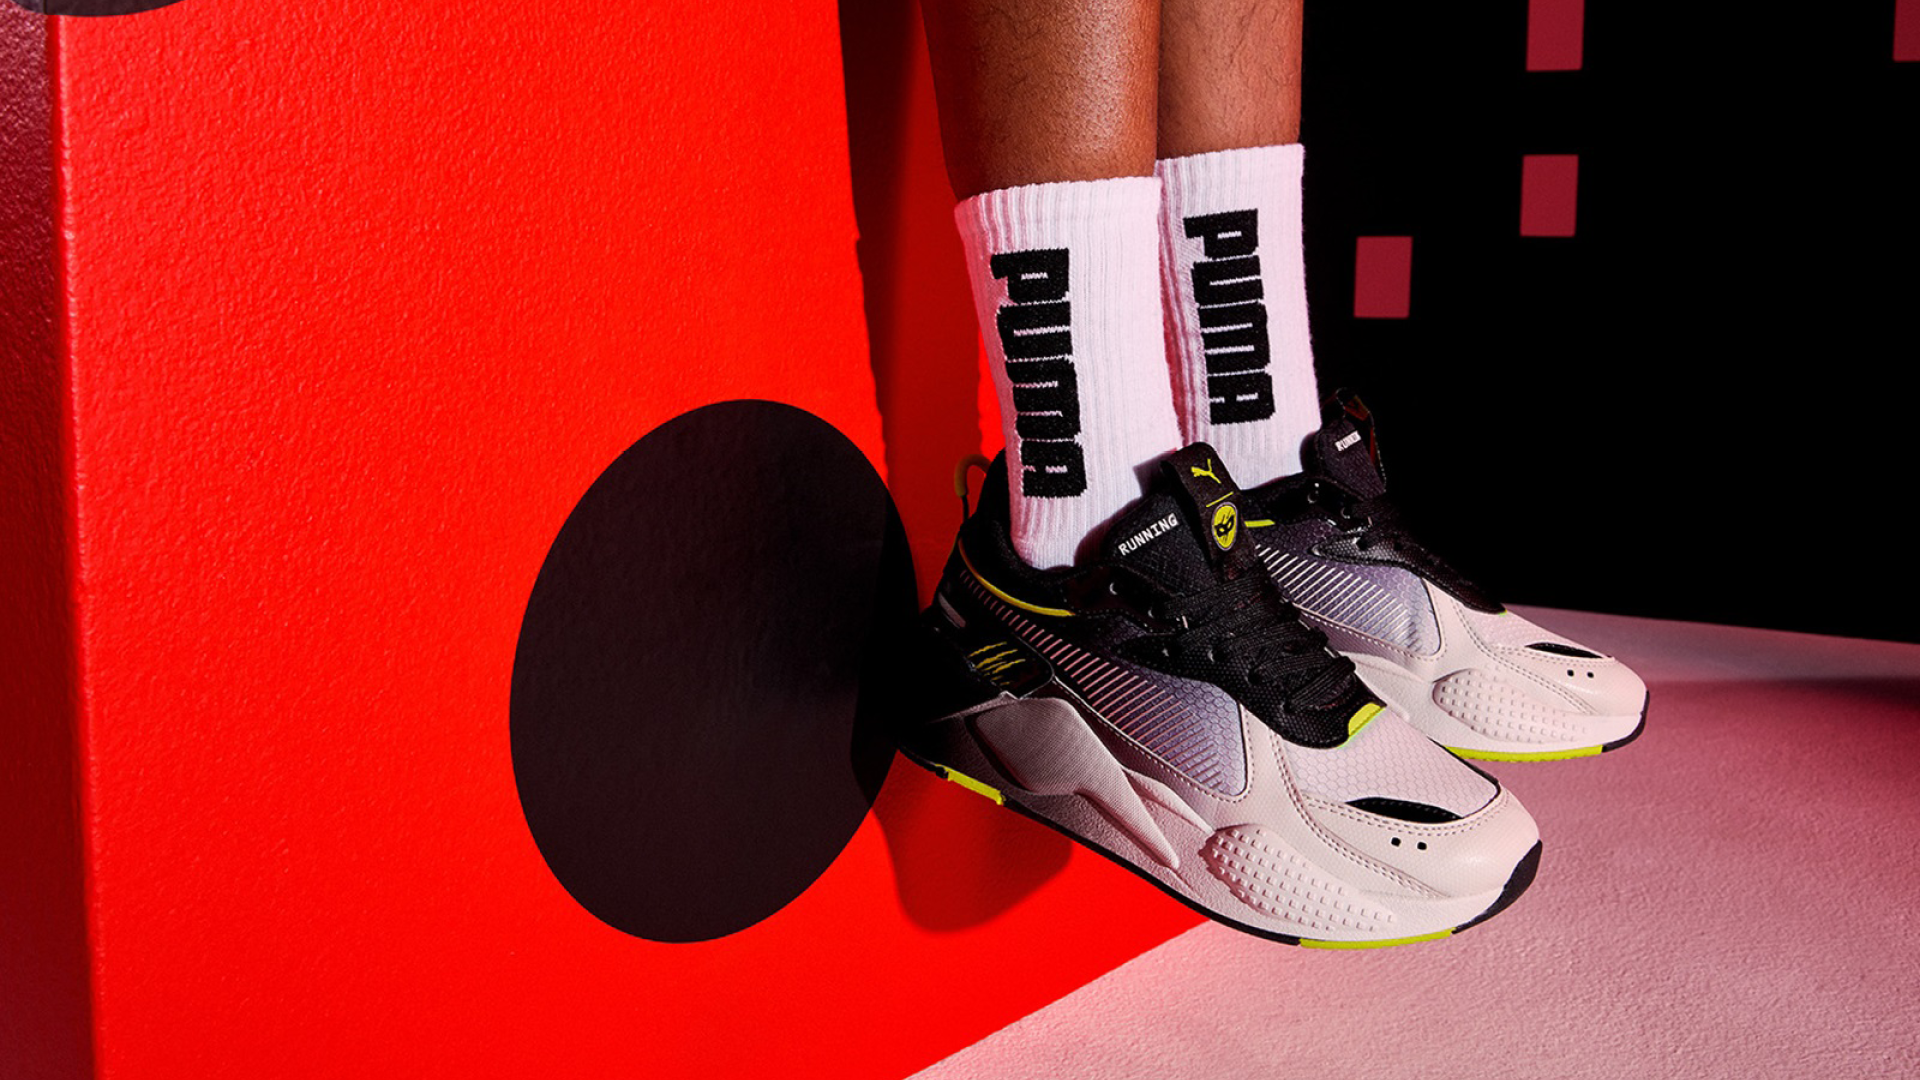 The PUMA x “Miraculous” collection.